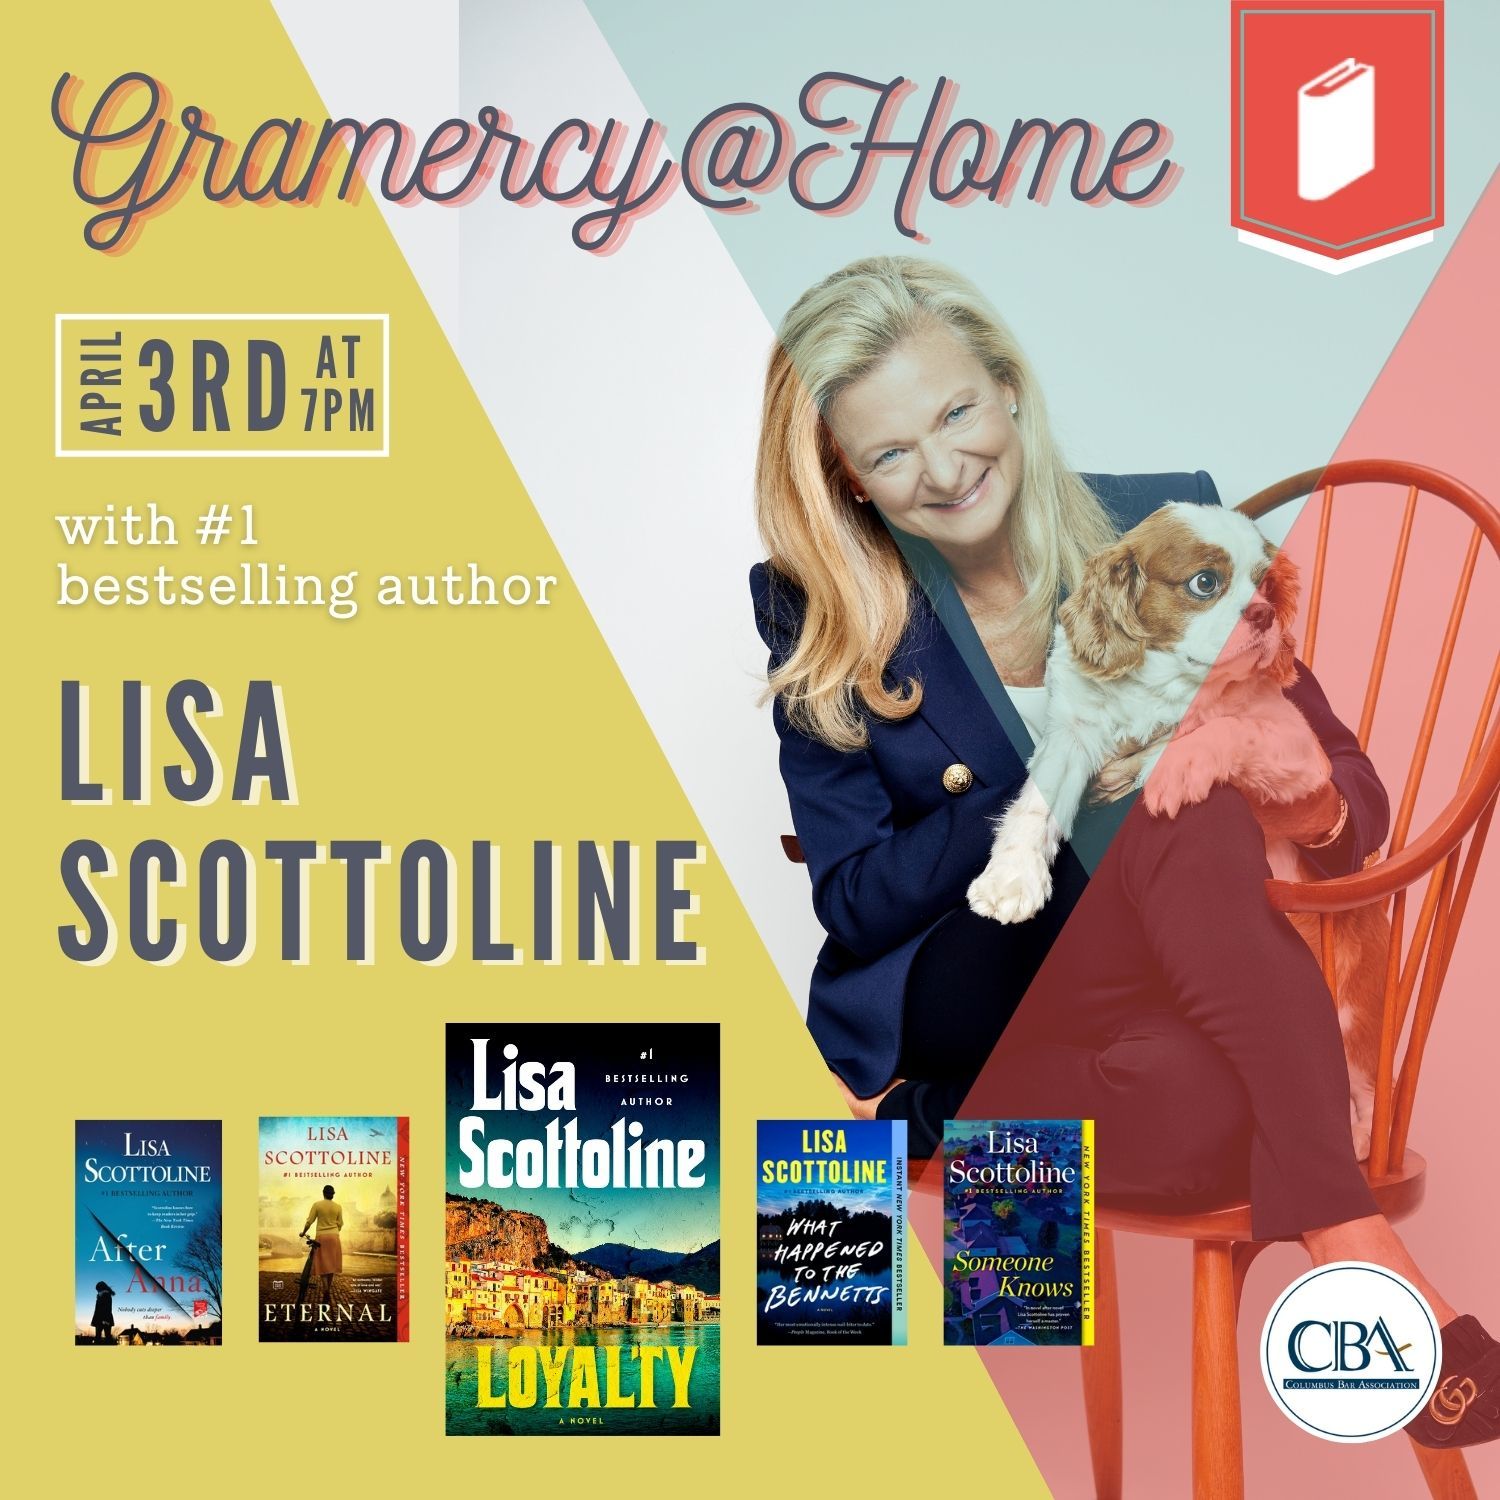 GramercyHome with bestselling author Lisa Scottoline